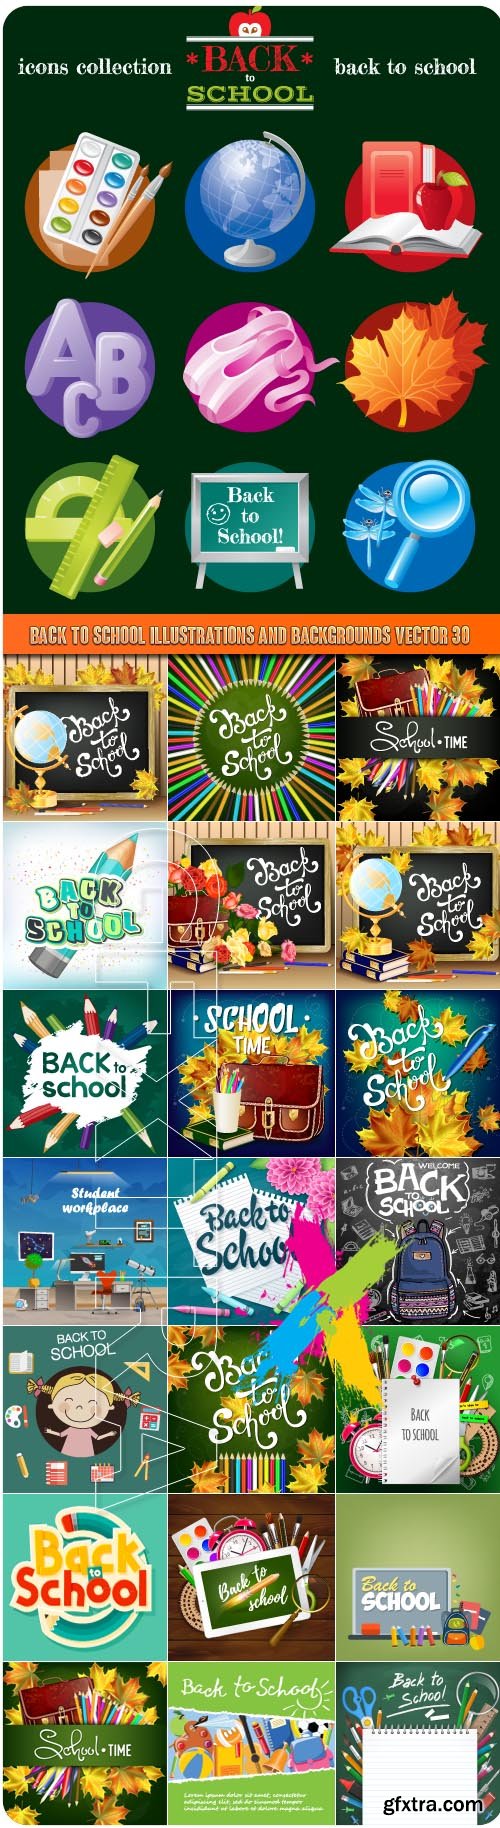 Back to school illustrations and backgrounds vector 30